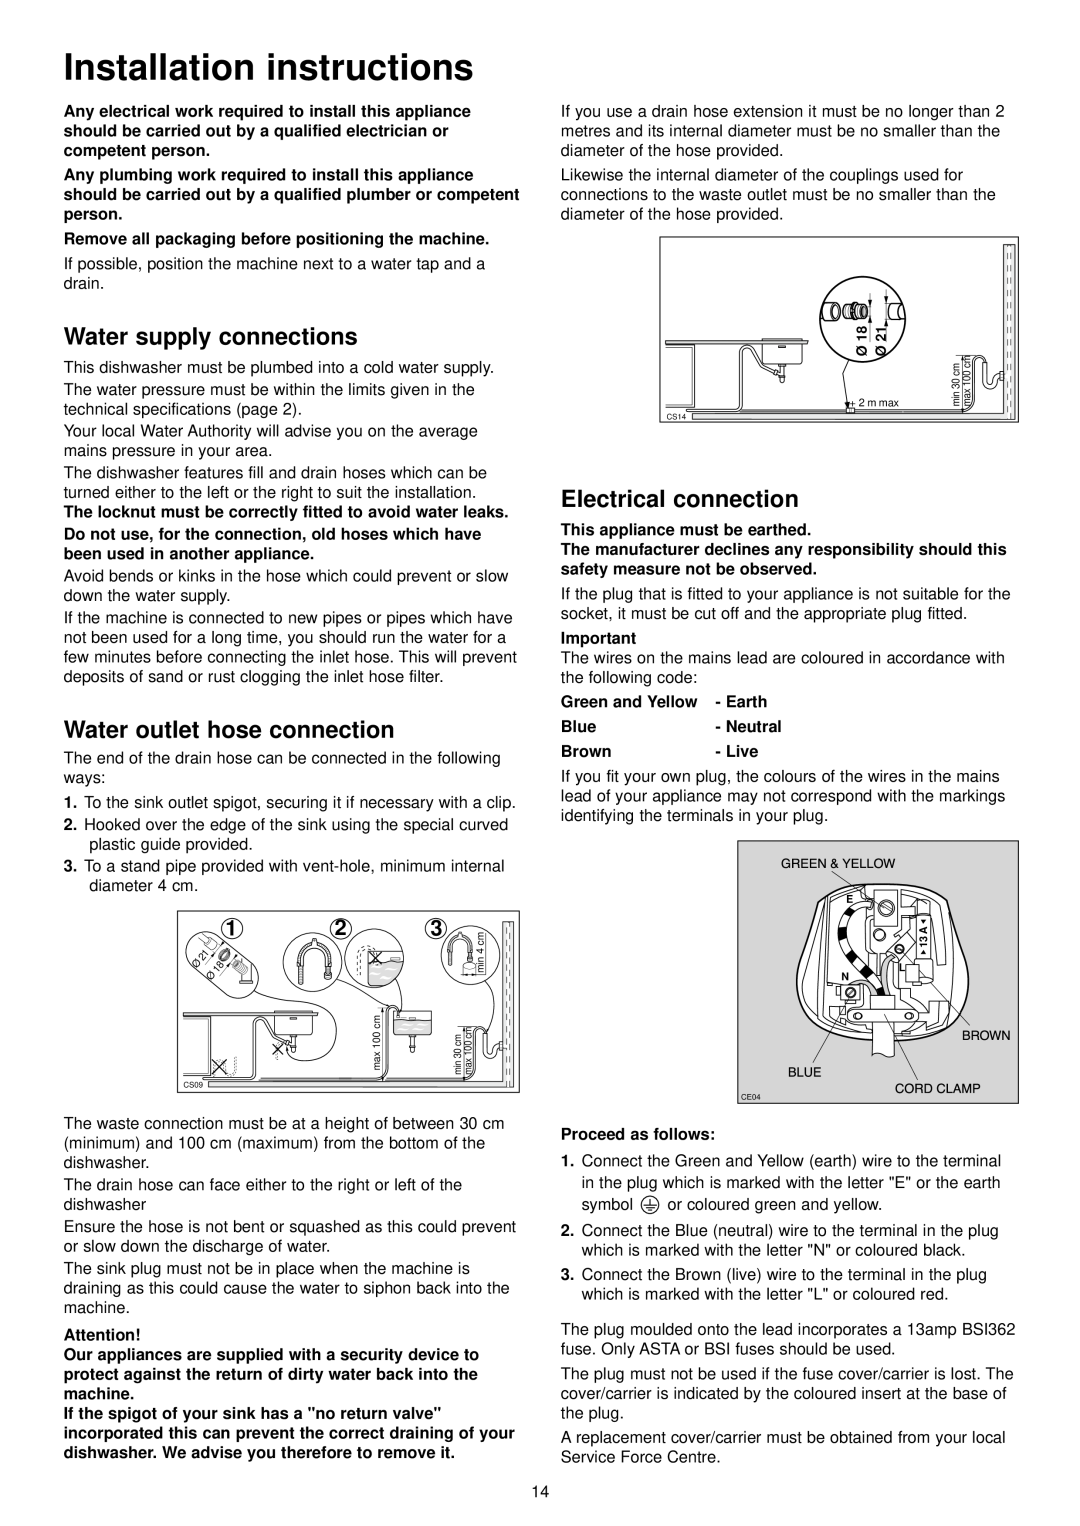 Zanussi IZZI Installation instructions, Water supply connections, Water outlet hose connection, Electrical connection 